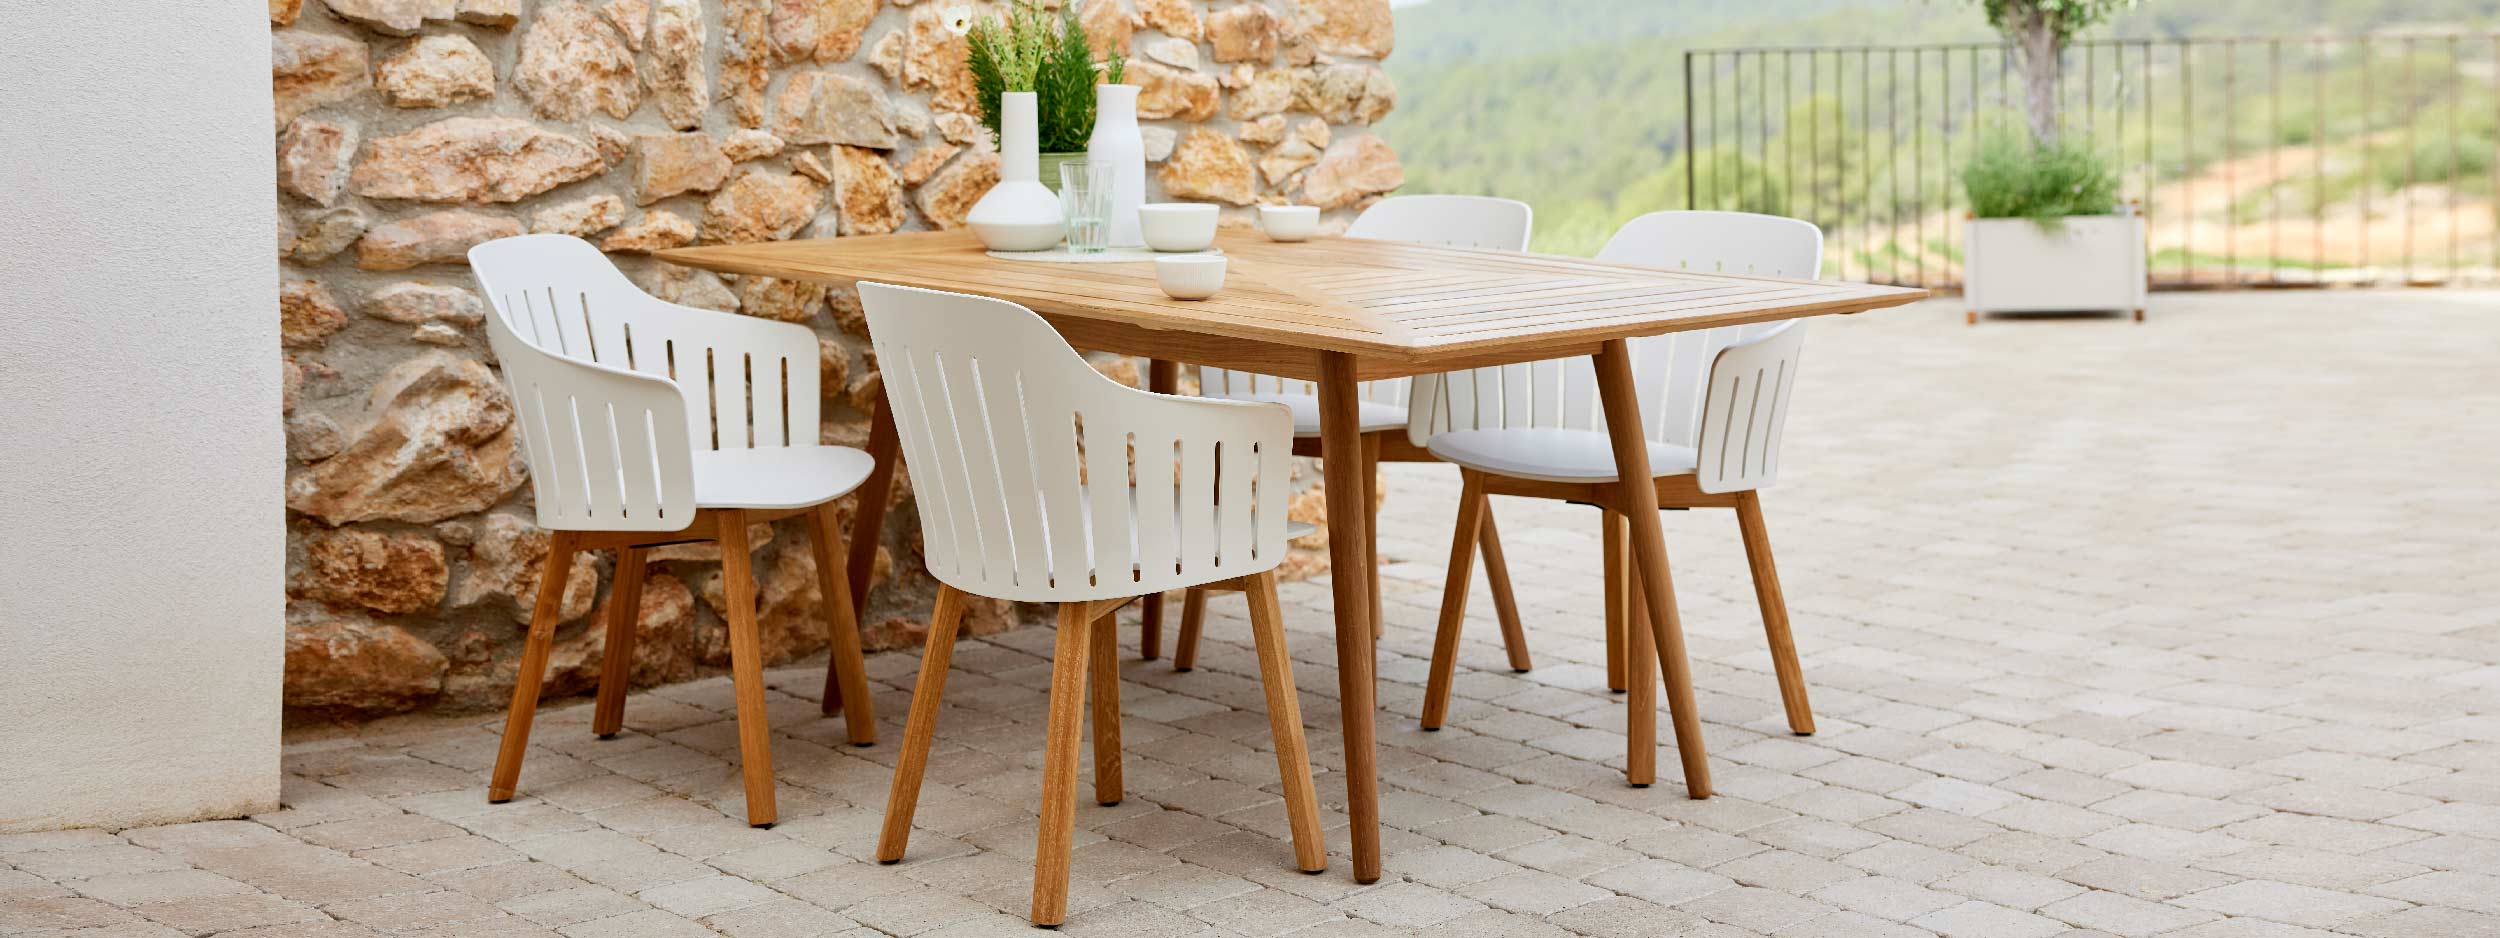 Image of Cane-line Define teak table with Choice contemporary garden chairs